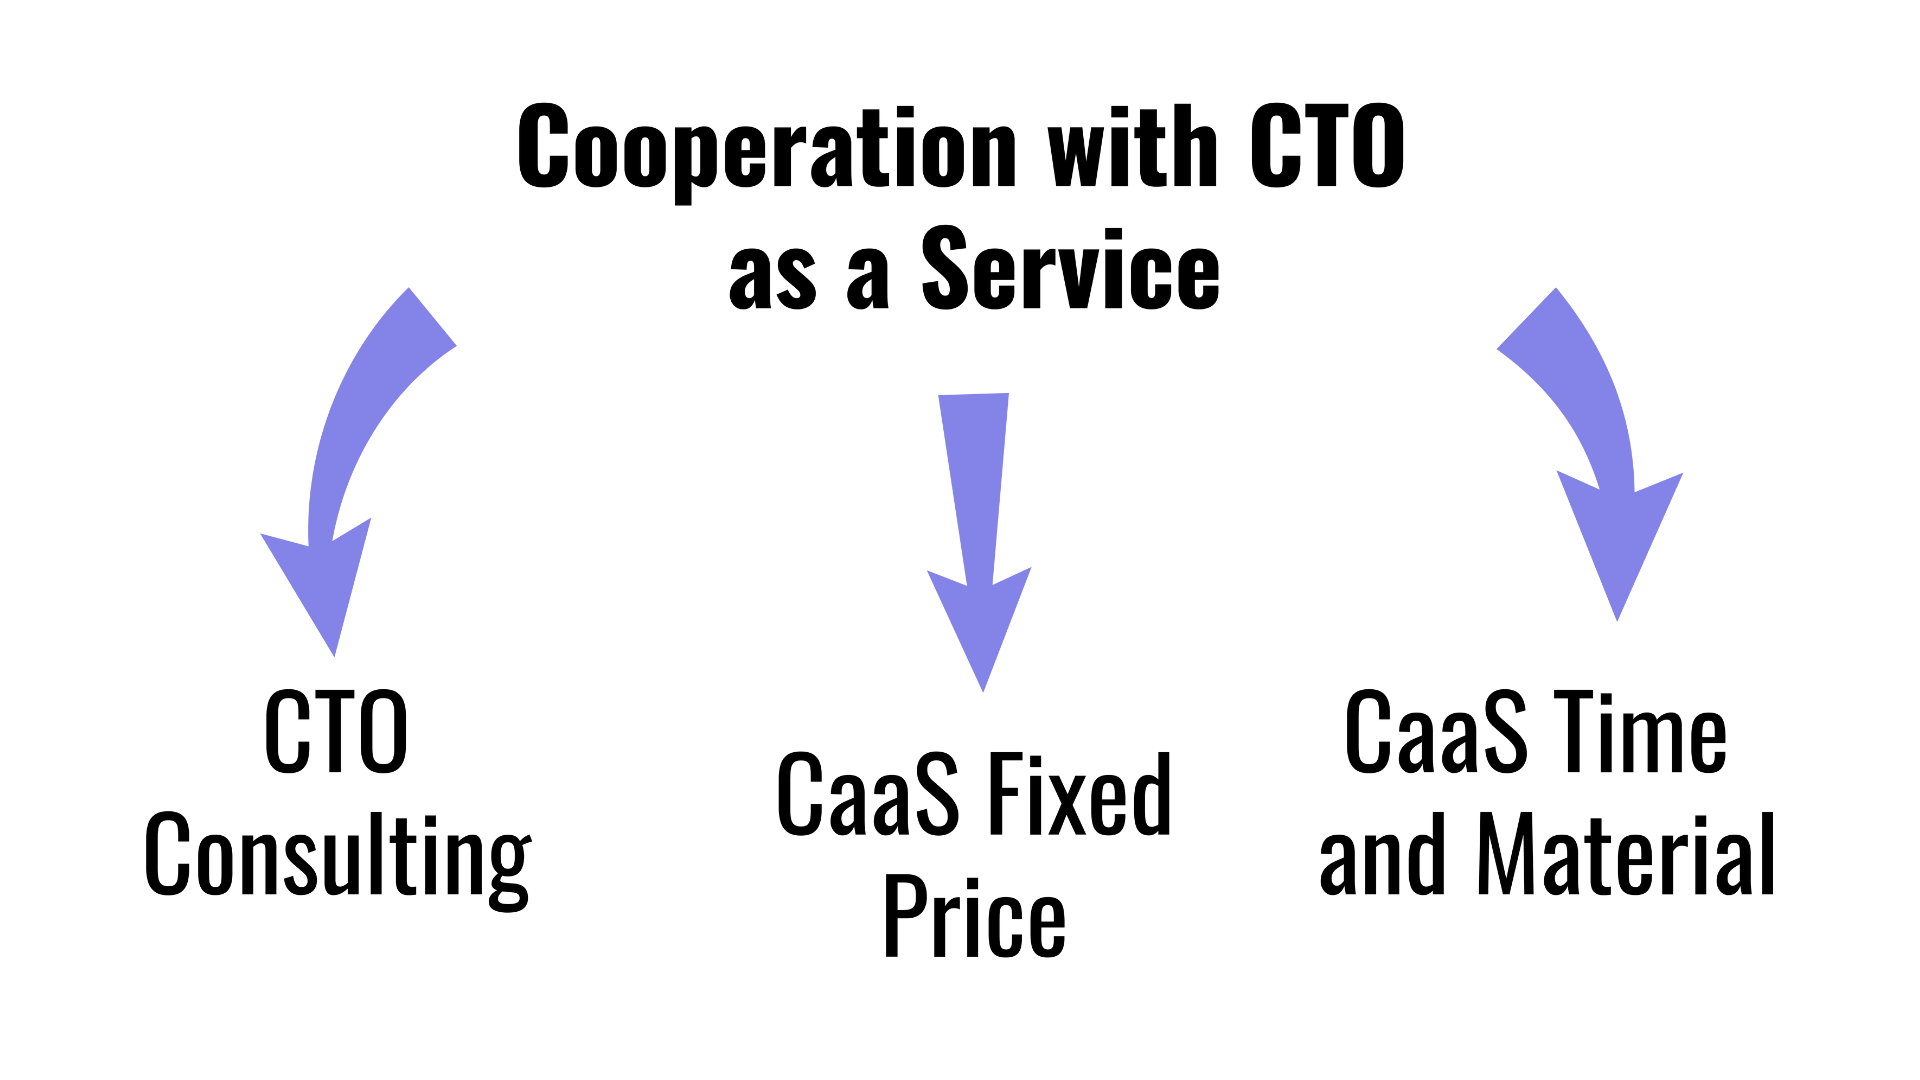 Cooperation with CTO as a Service.